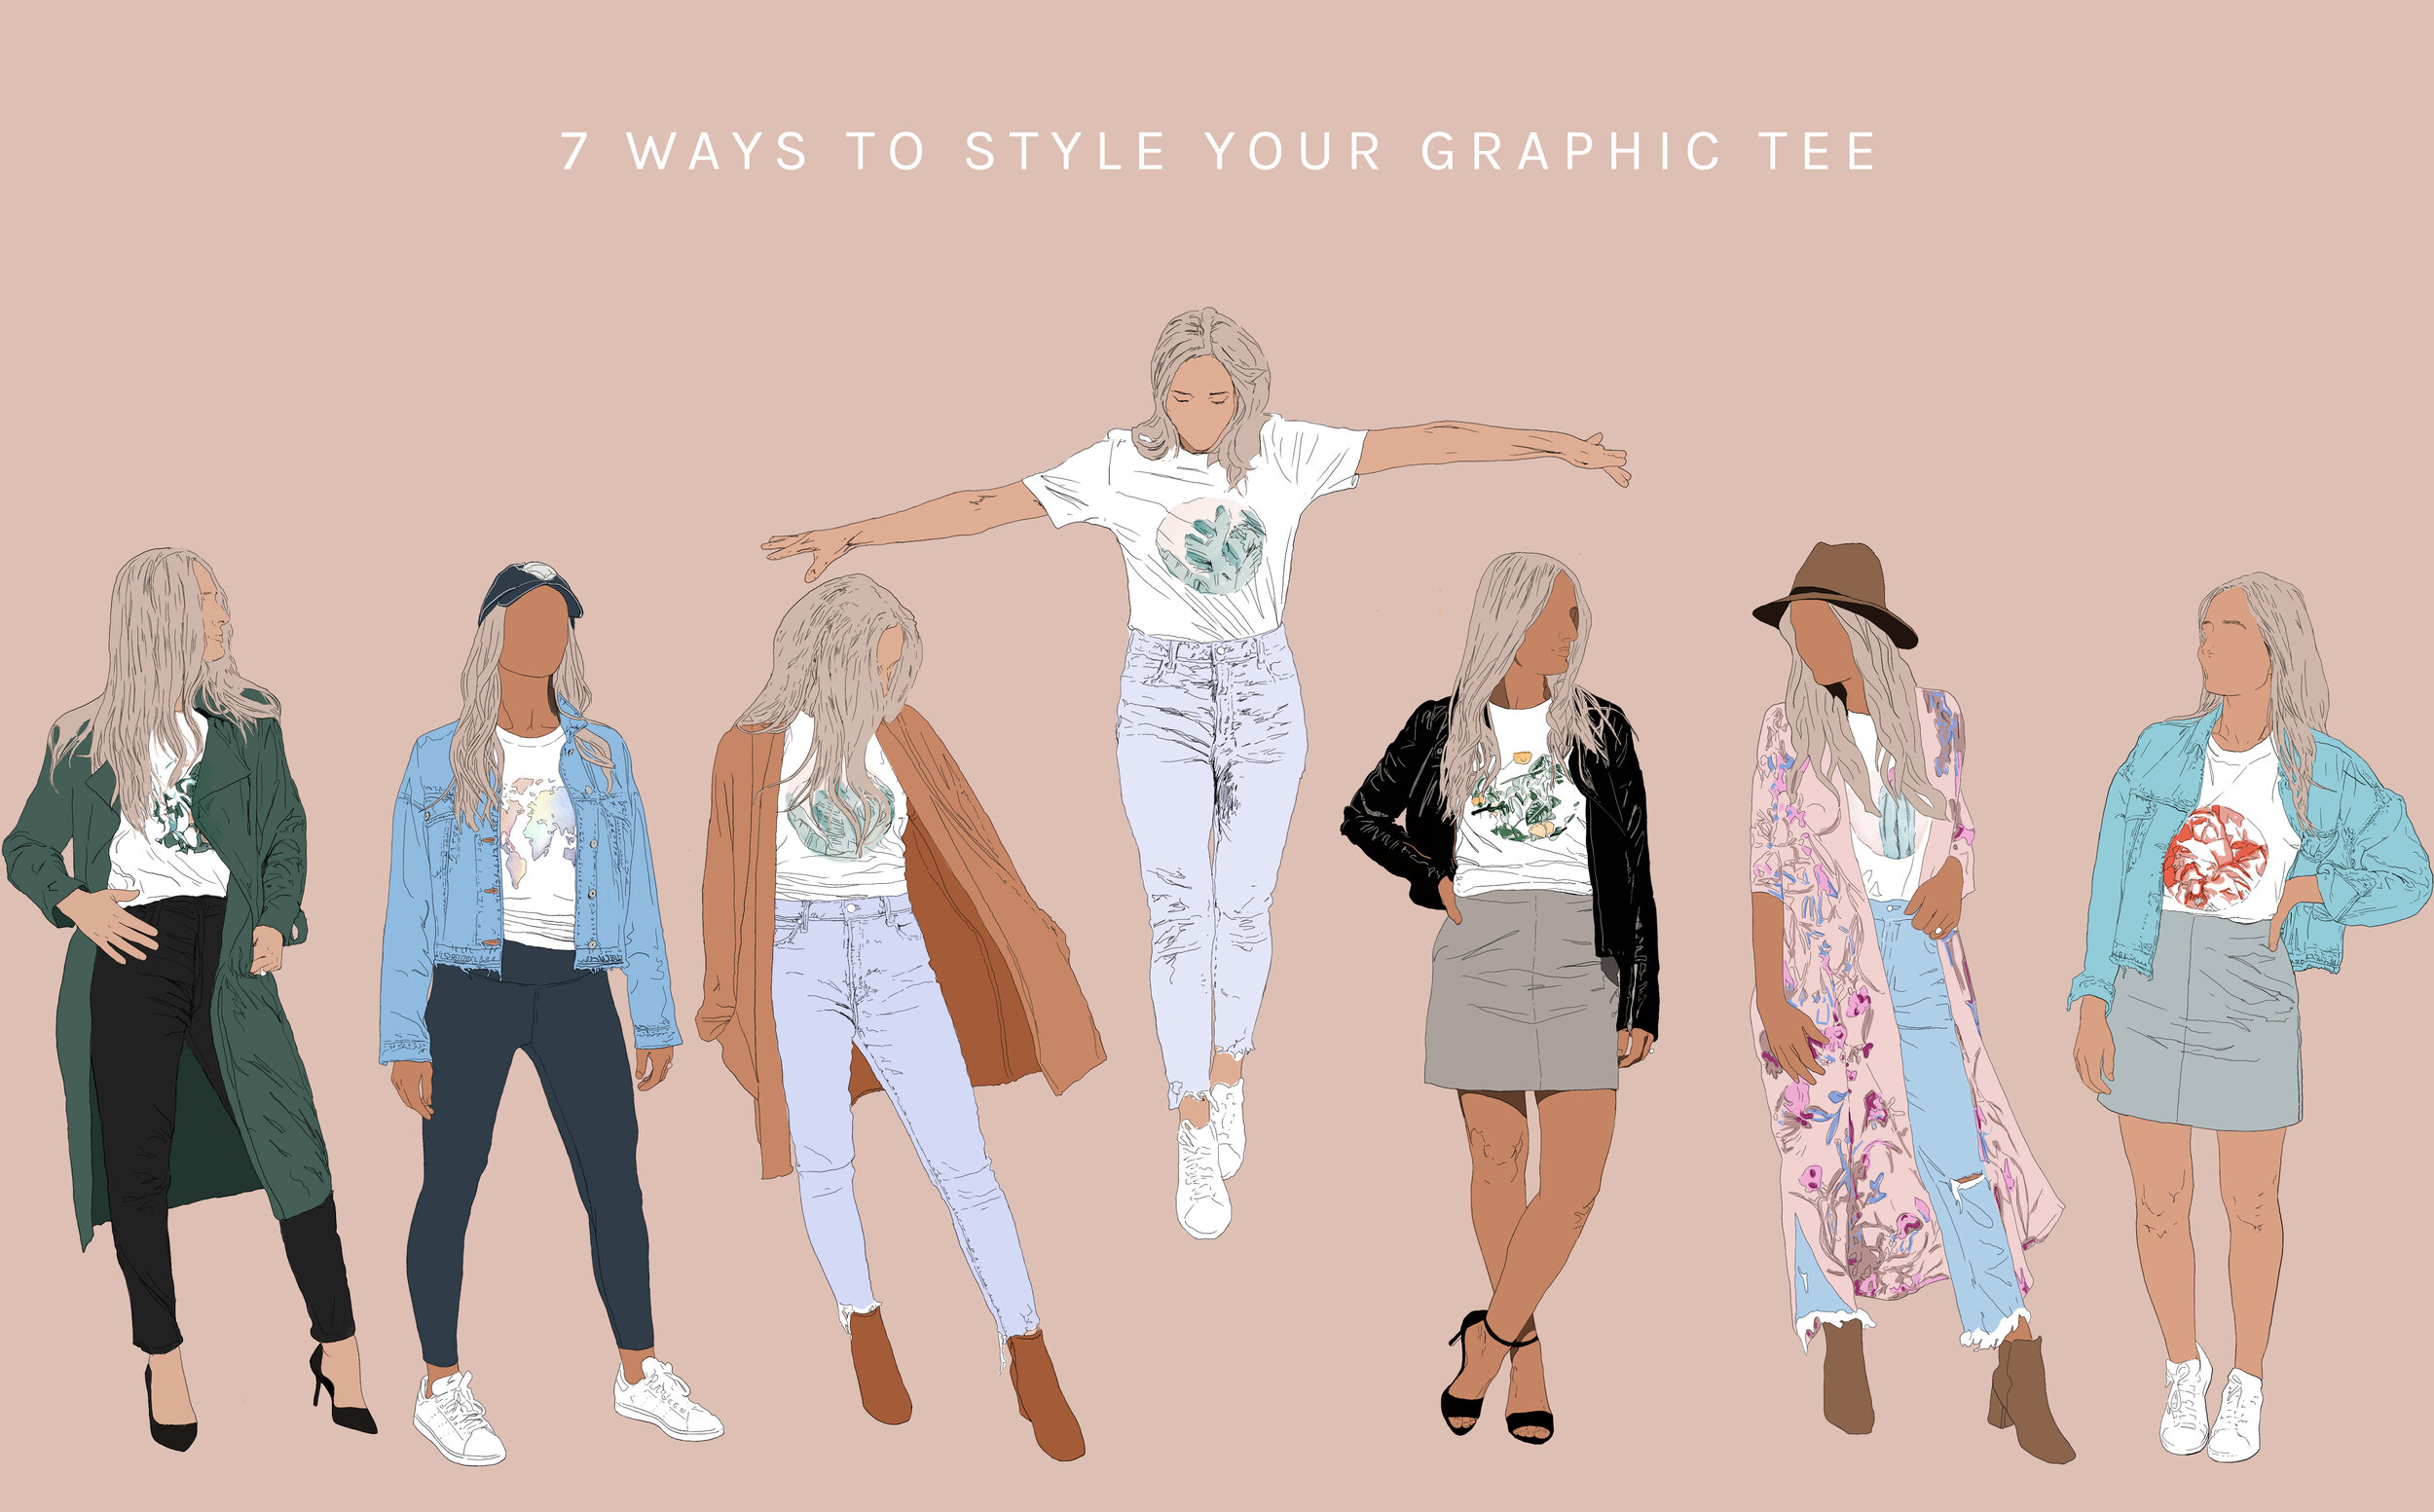 How to Make Graphic Tees